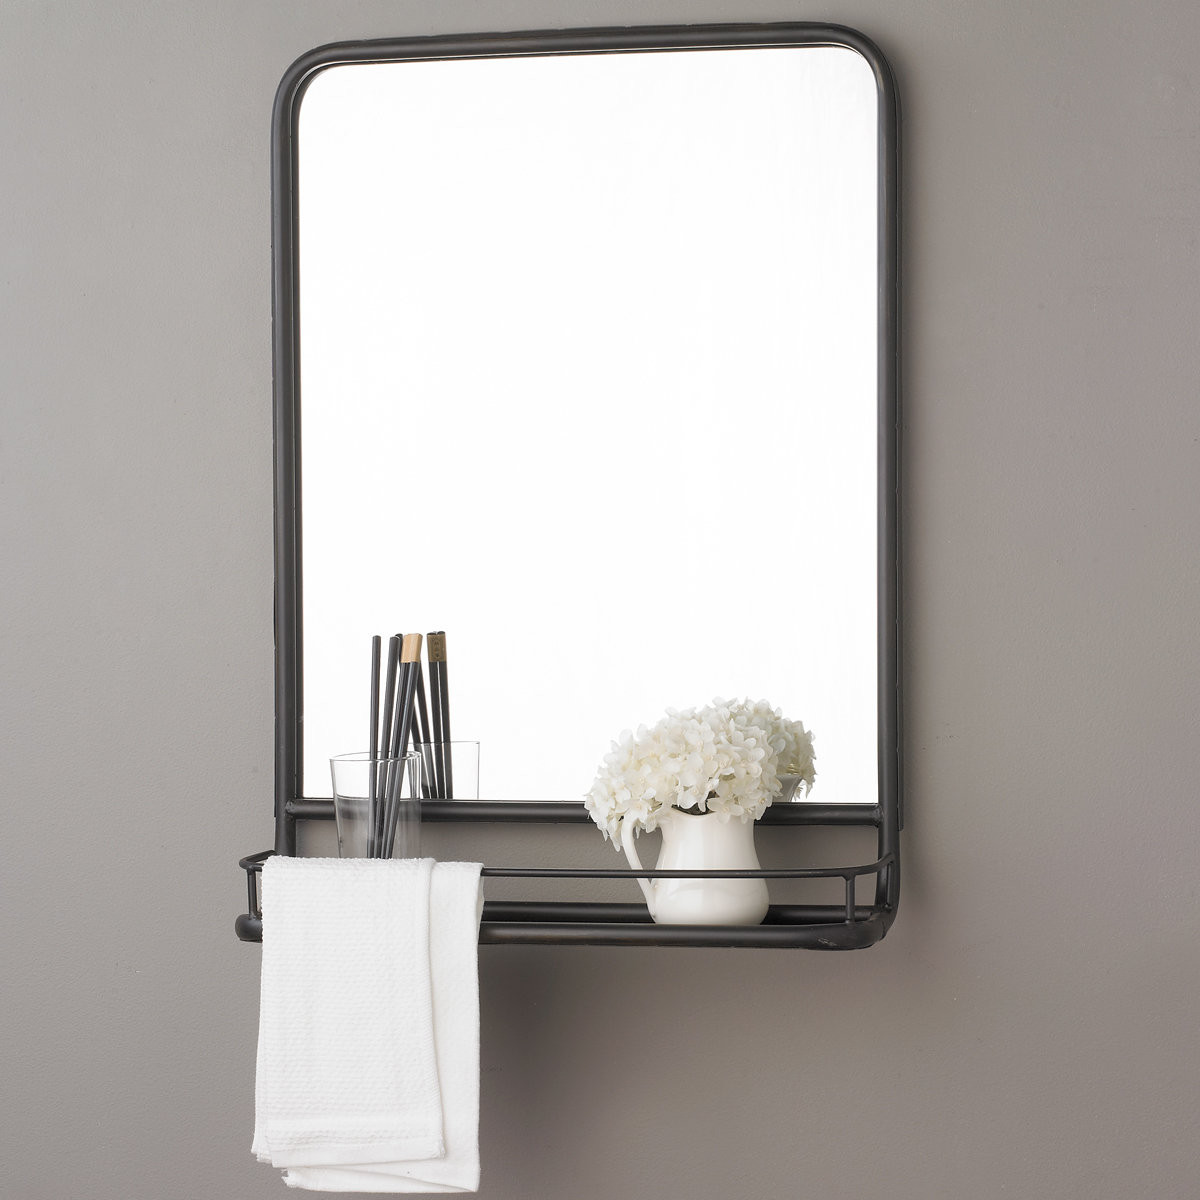 Metal Framed Bathroom Mirrors
 Metal Mirror with Shelf Small Shades of Light